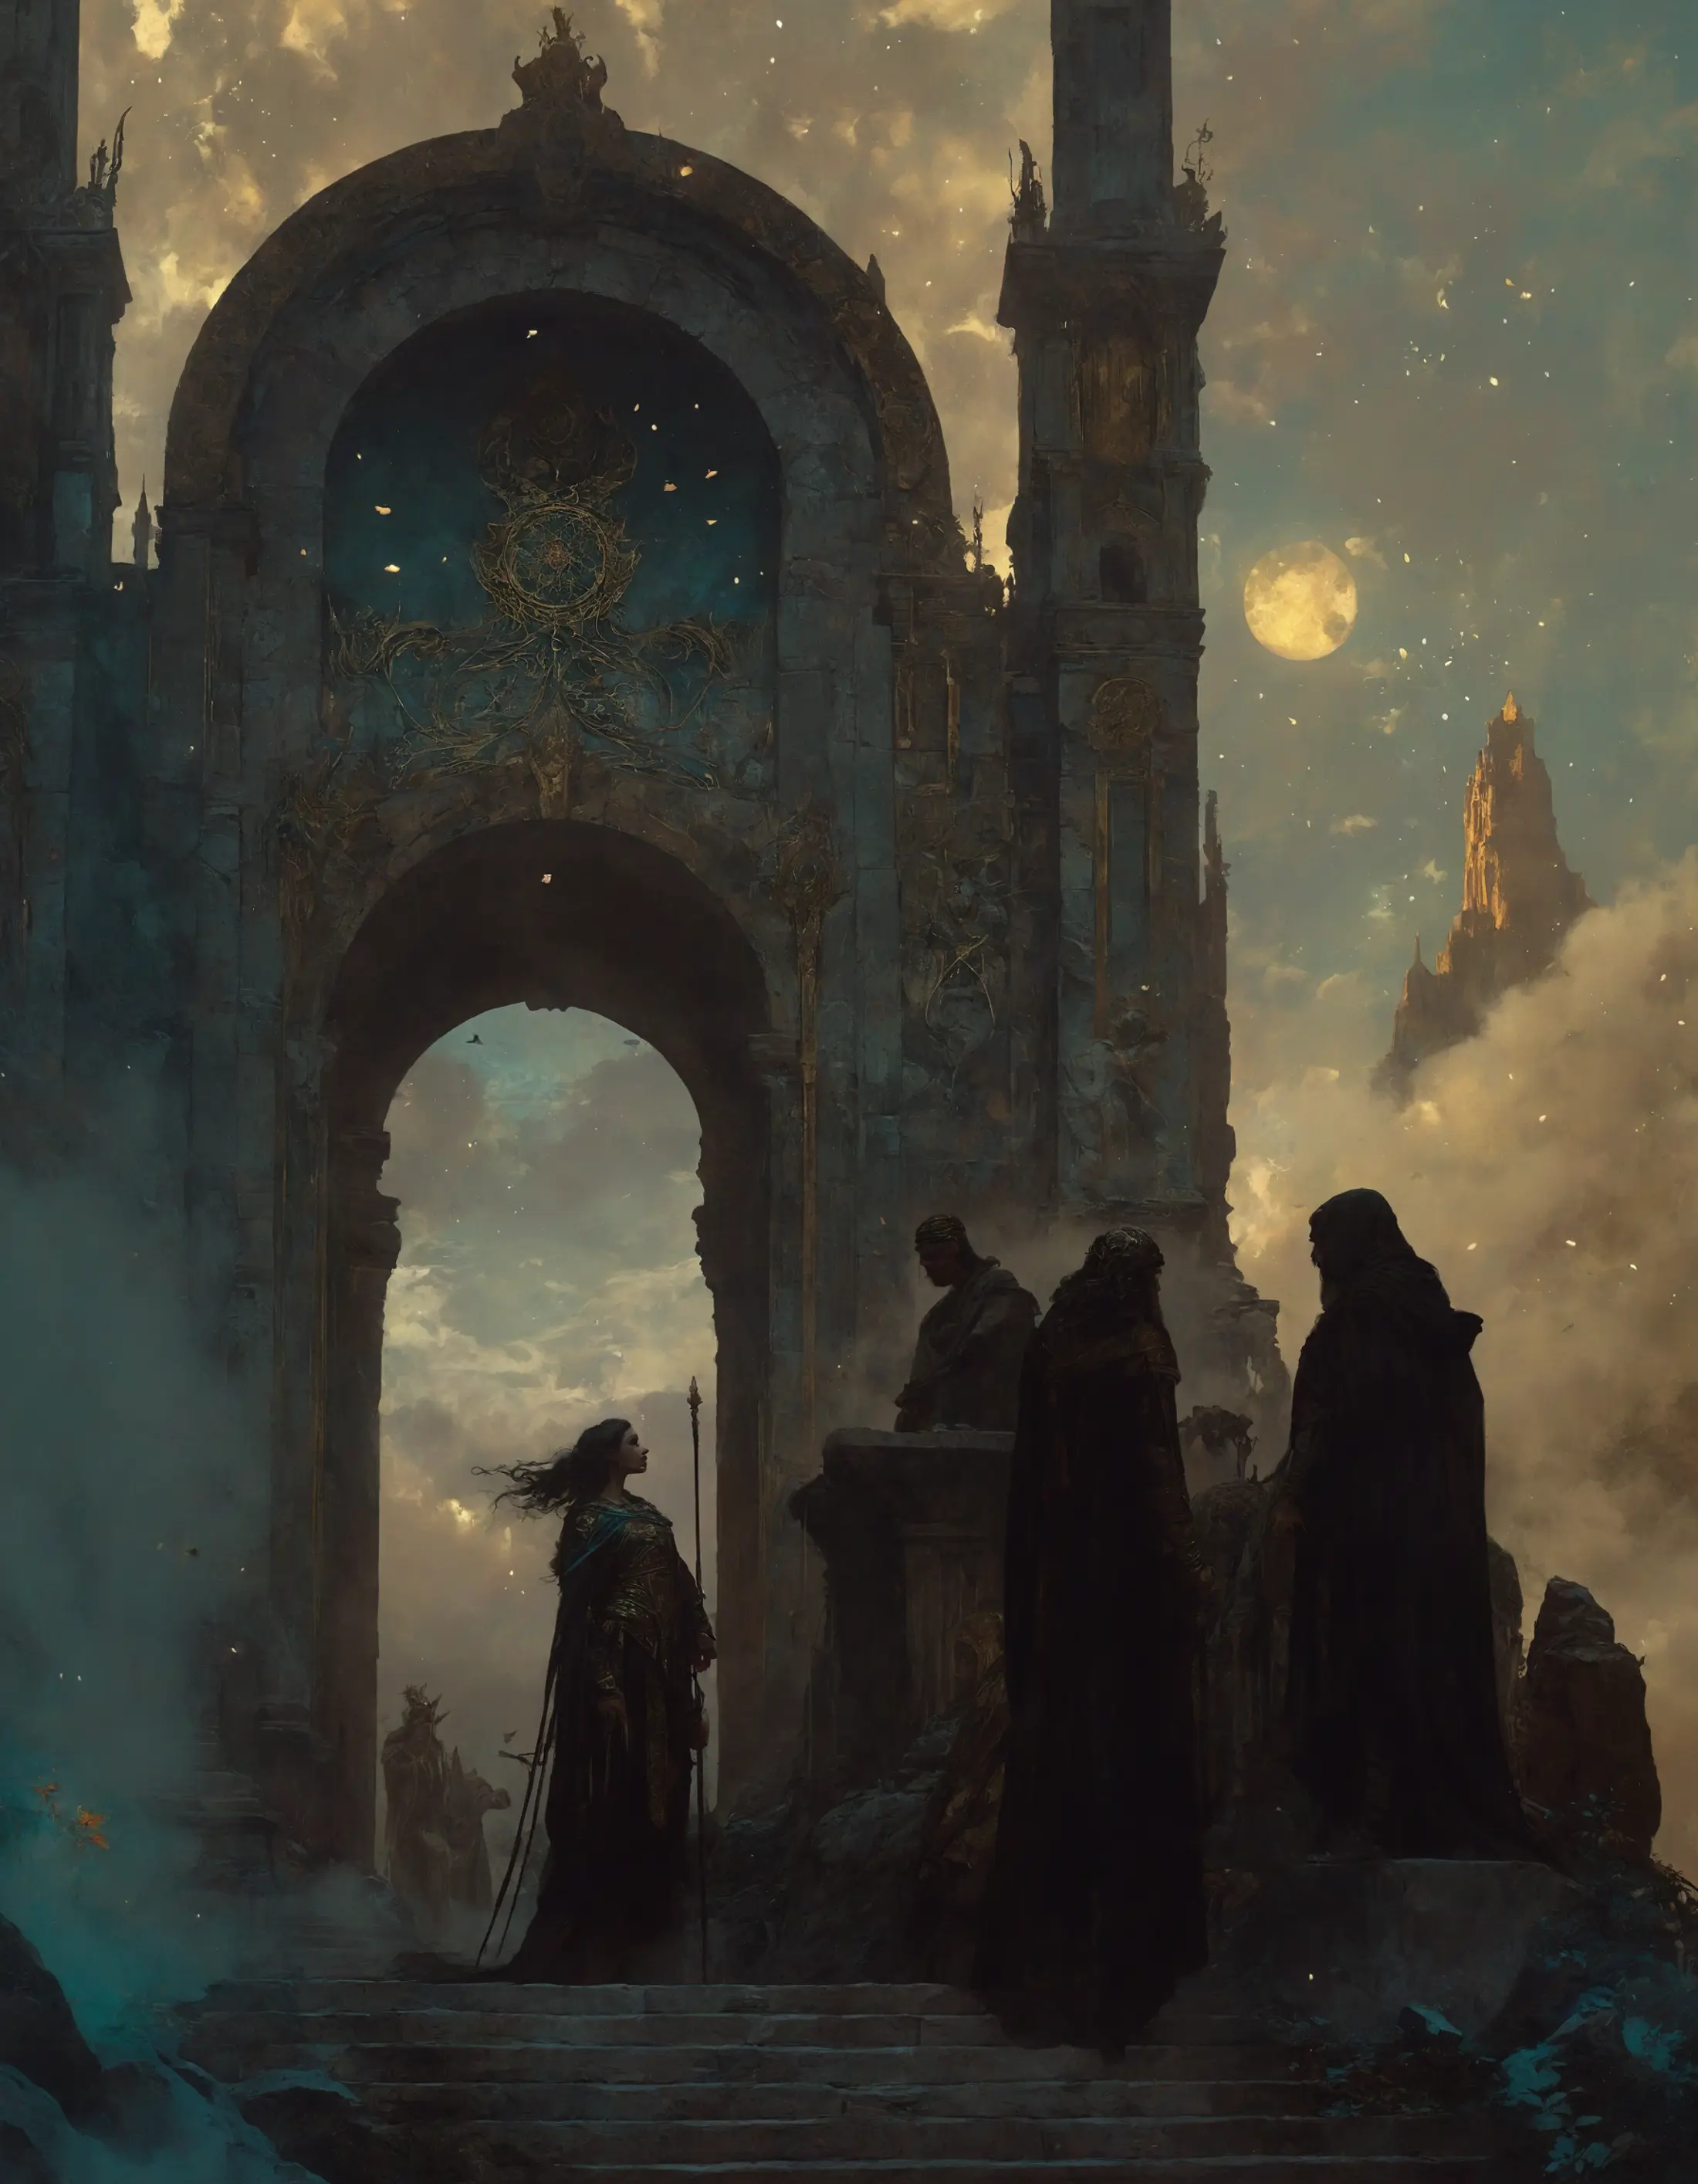 A group of figures stand at the top of a flight of stairs under an ancient structure adorned with intricate designs, as if in mid-conversation. The setting is accentuated by towering structures and a mist that shrouds the lower part of the scene, with the moon partially visible through a hazy sky.